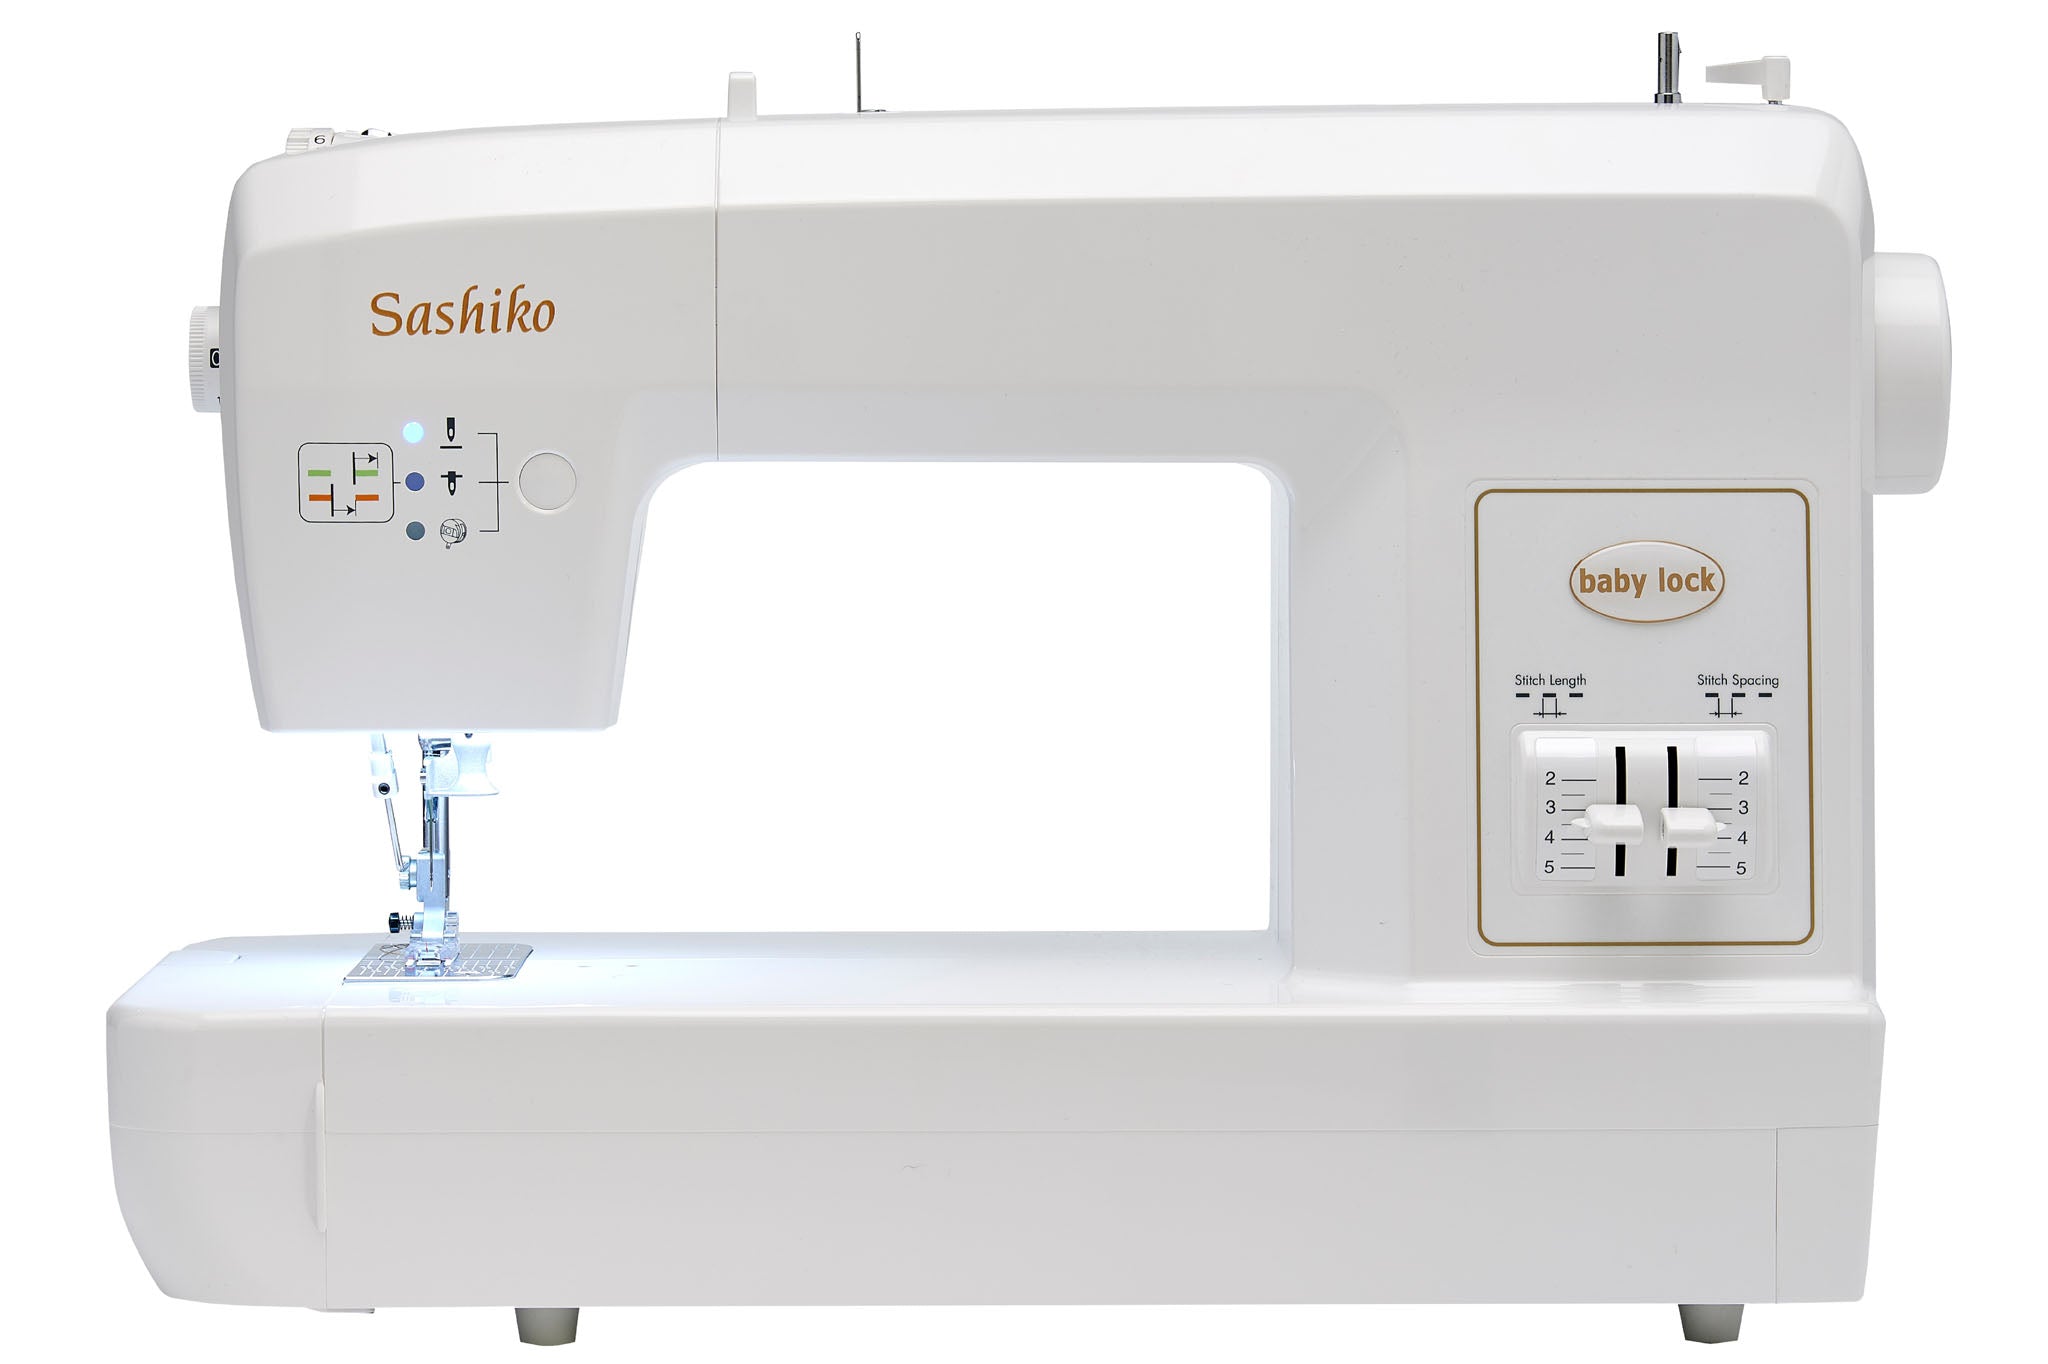 Contact Okan Arts to learn about the latest deal for the Sashiko 2 sewing machine